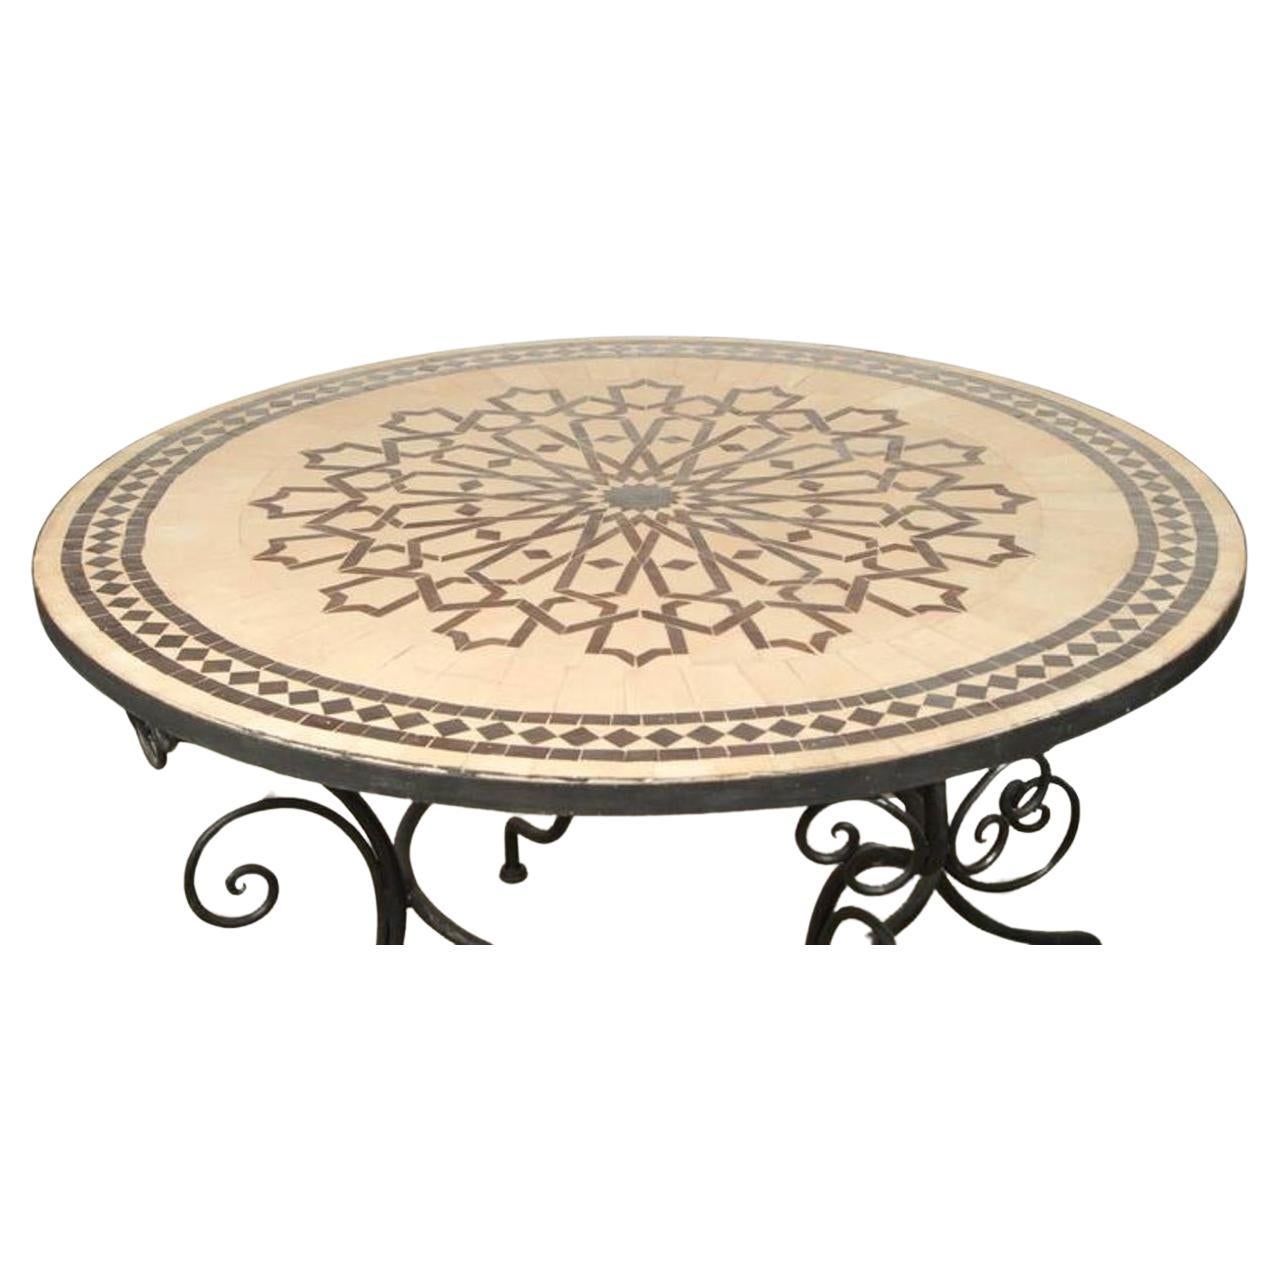 Moroccan Round Mosaic Outdoor Tile Table on Iron Base 47 in For Sale